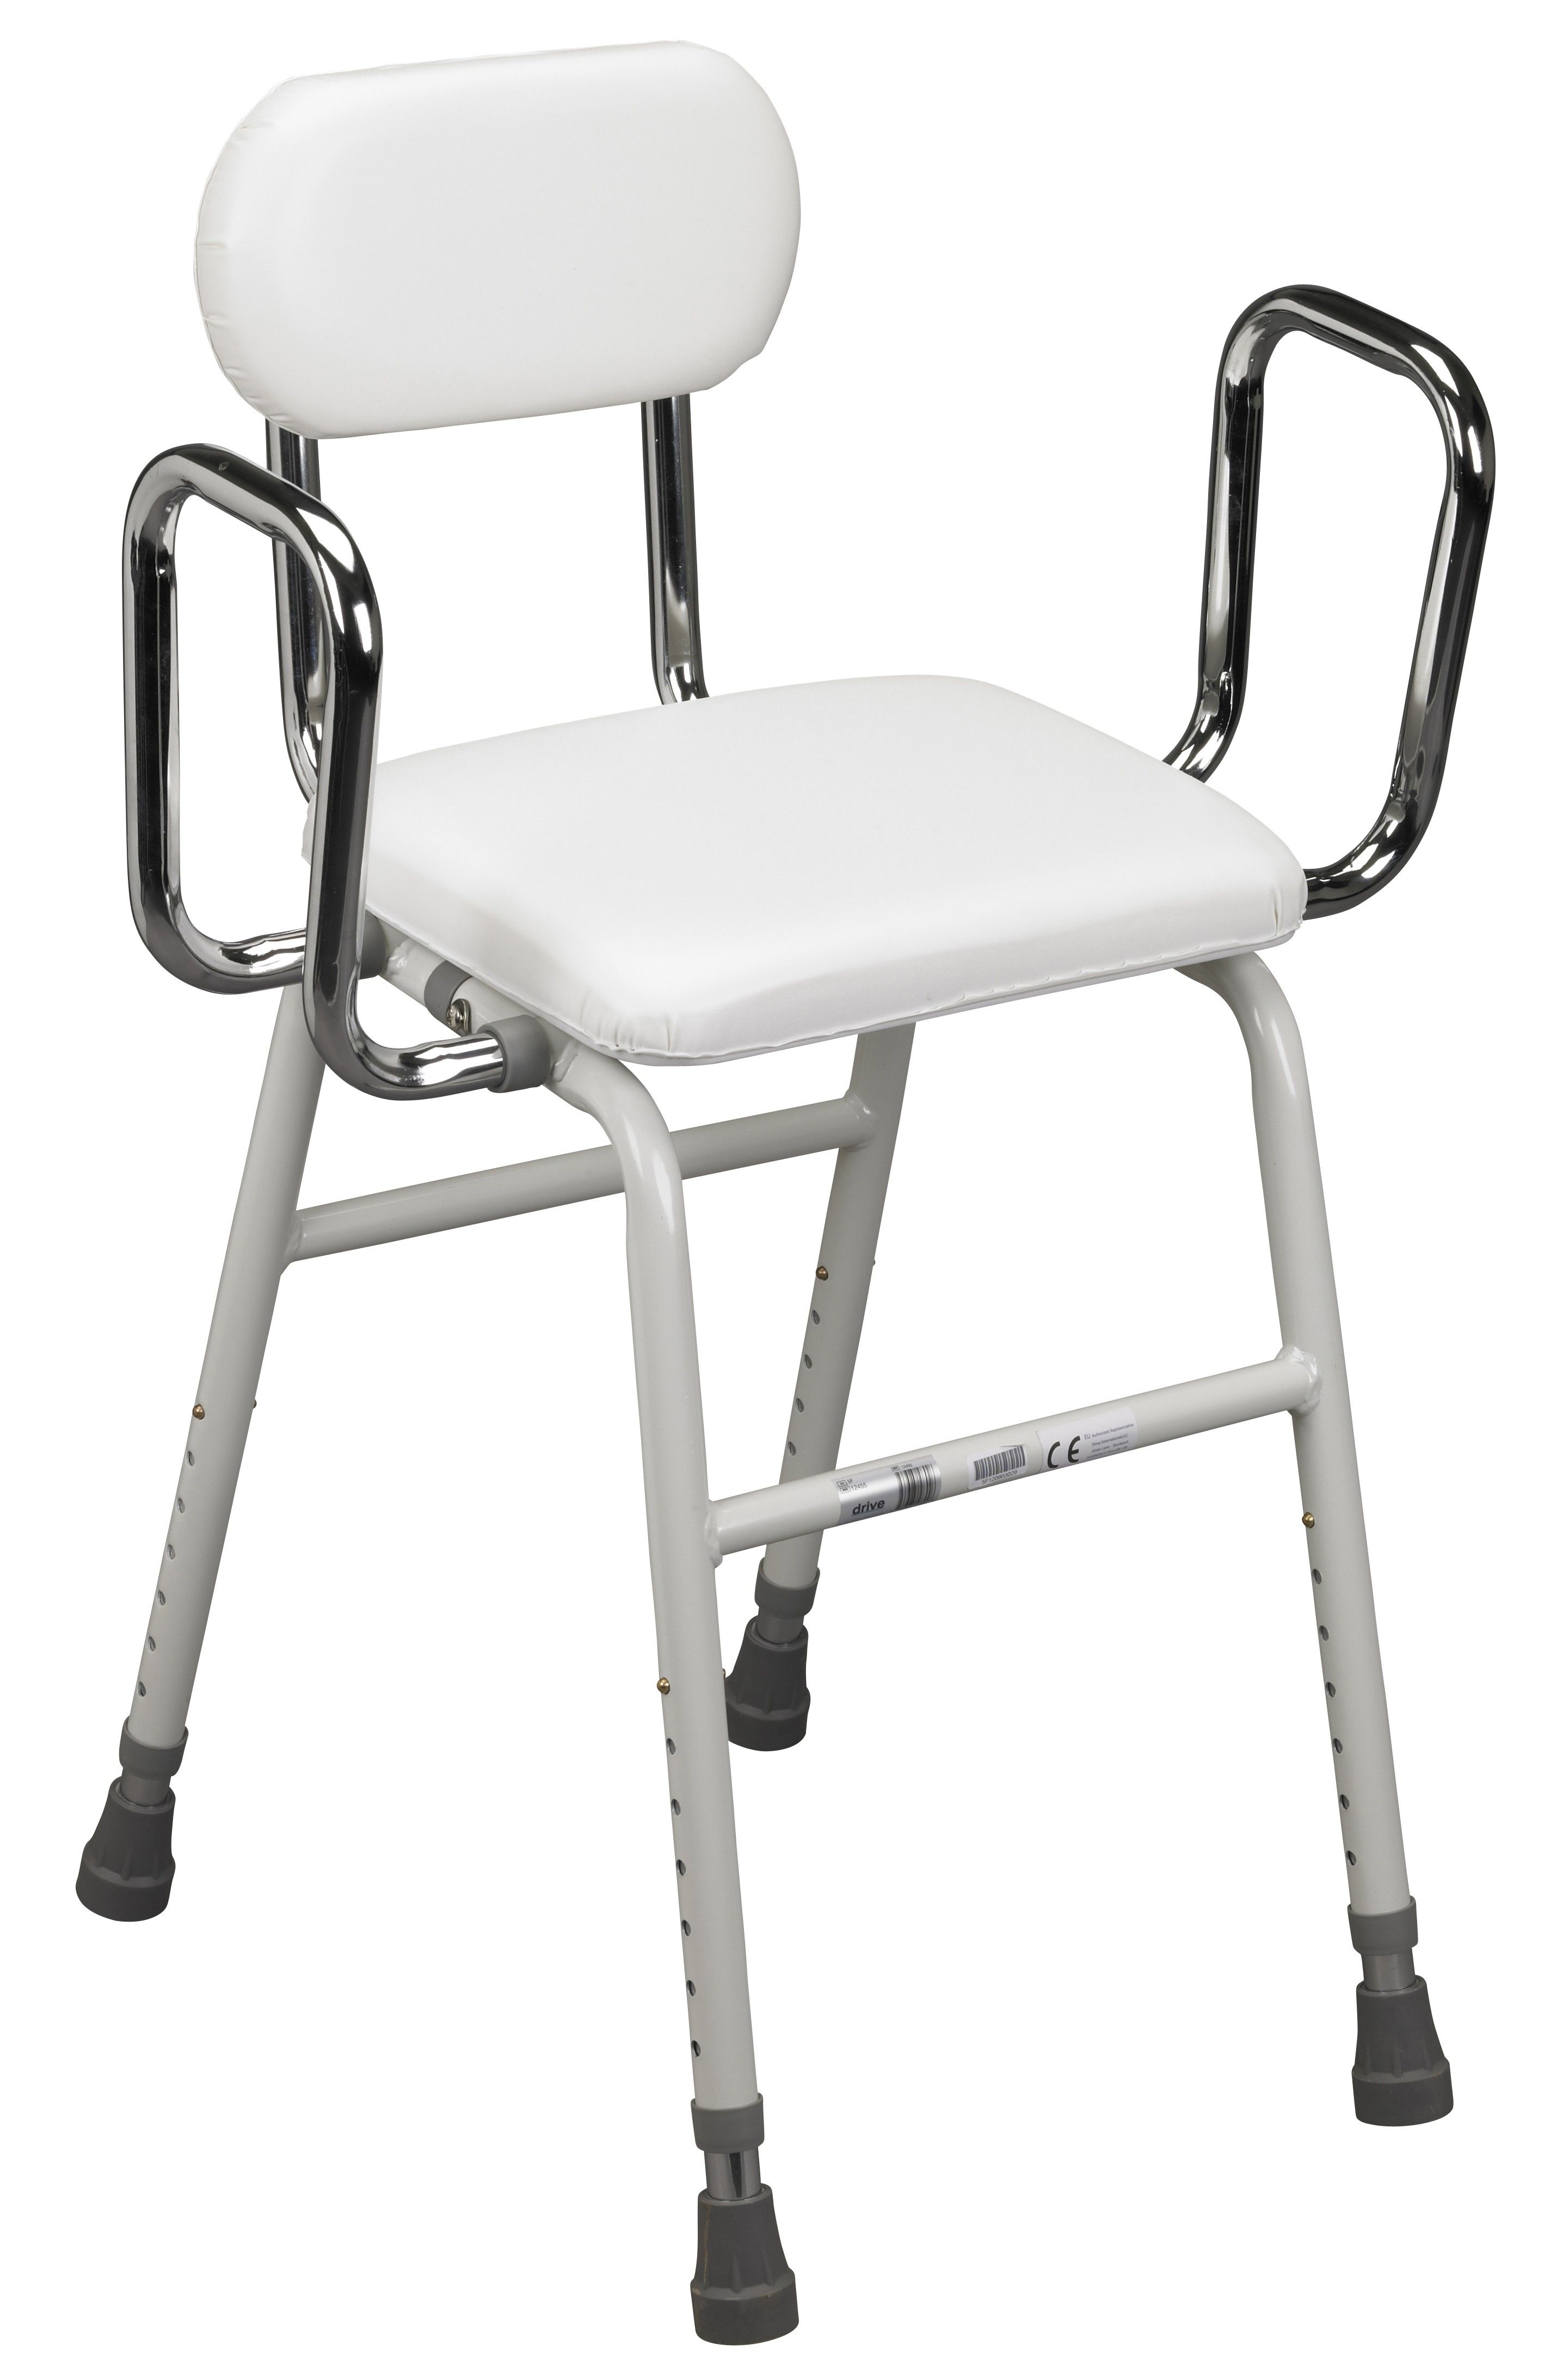 Extra Tall Hip Stool with Adjustable Arms